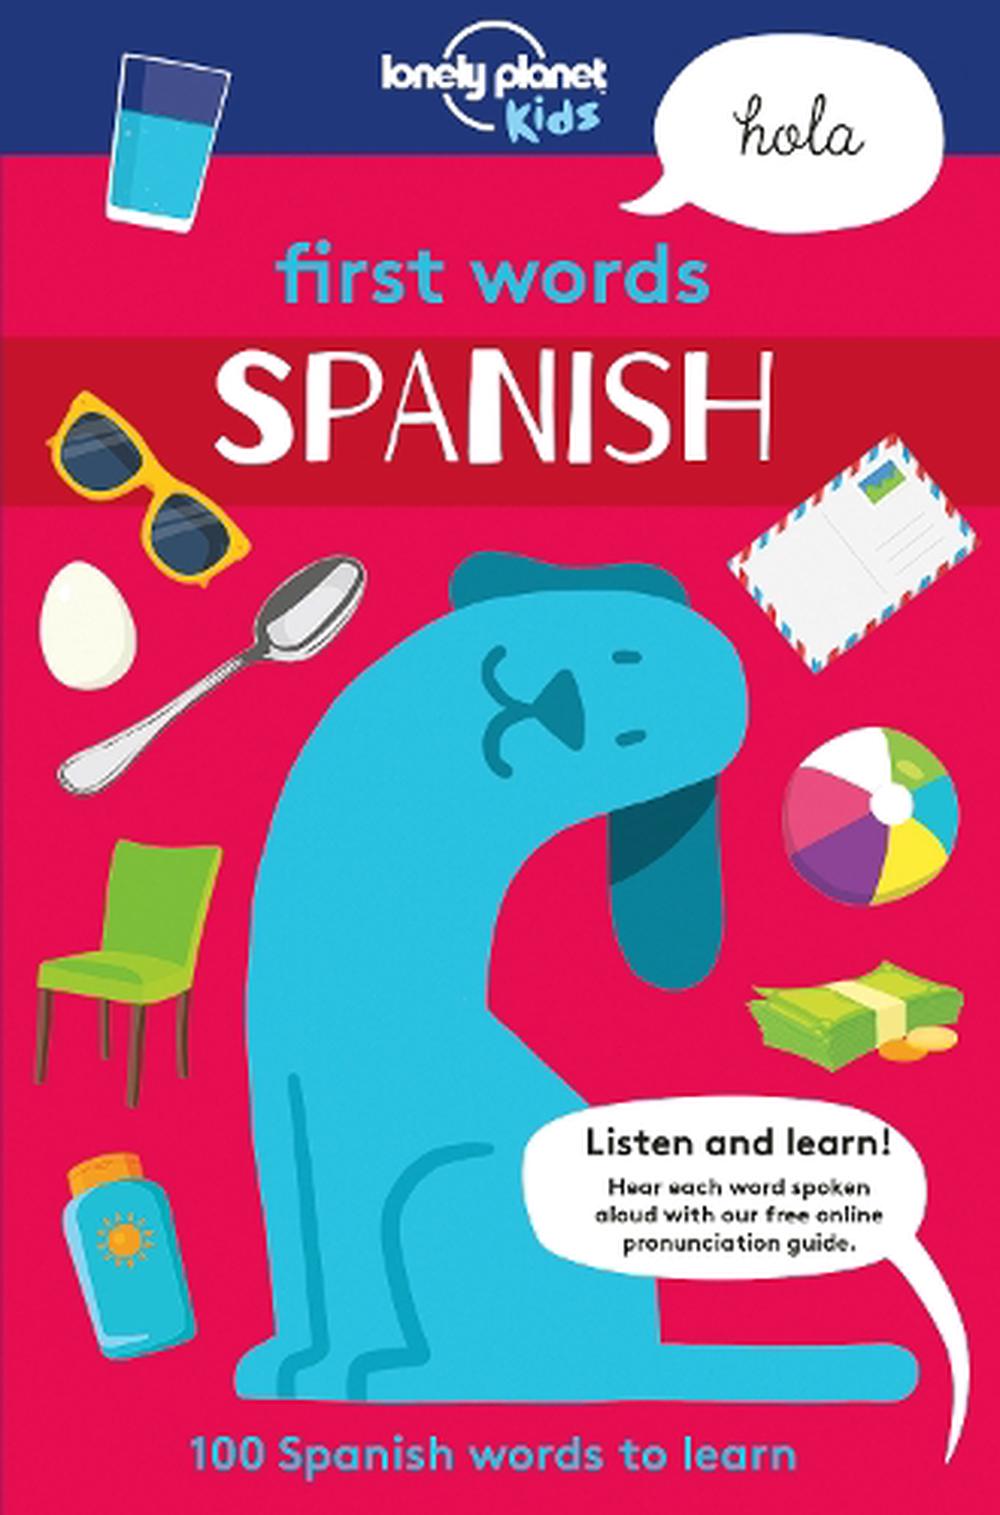 Spanish　Kids,　9781786573162　Words　First　Lonely　Planet　Paperback,　Planet　Kids　at　by　Nile　Lonely　Buy　online　The